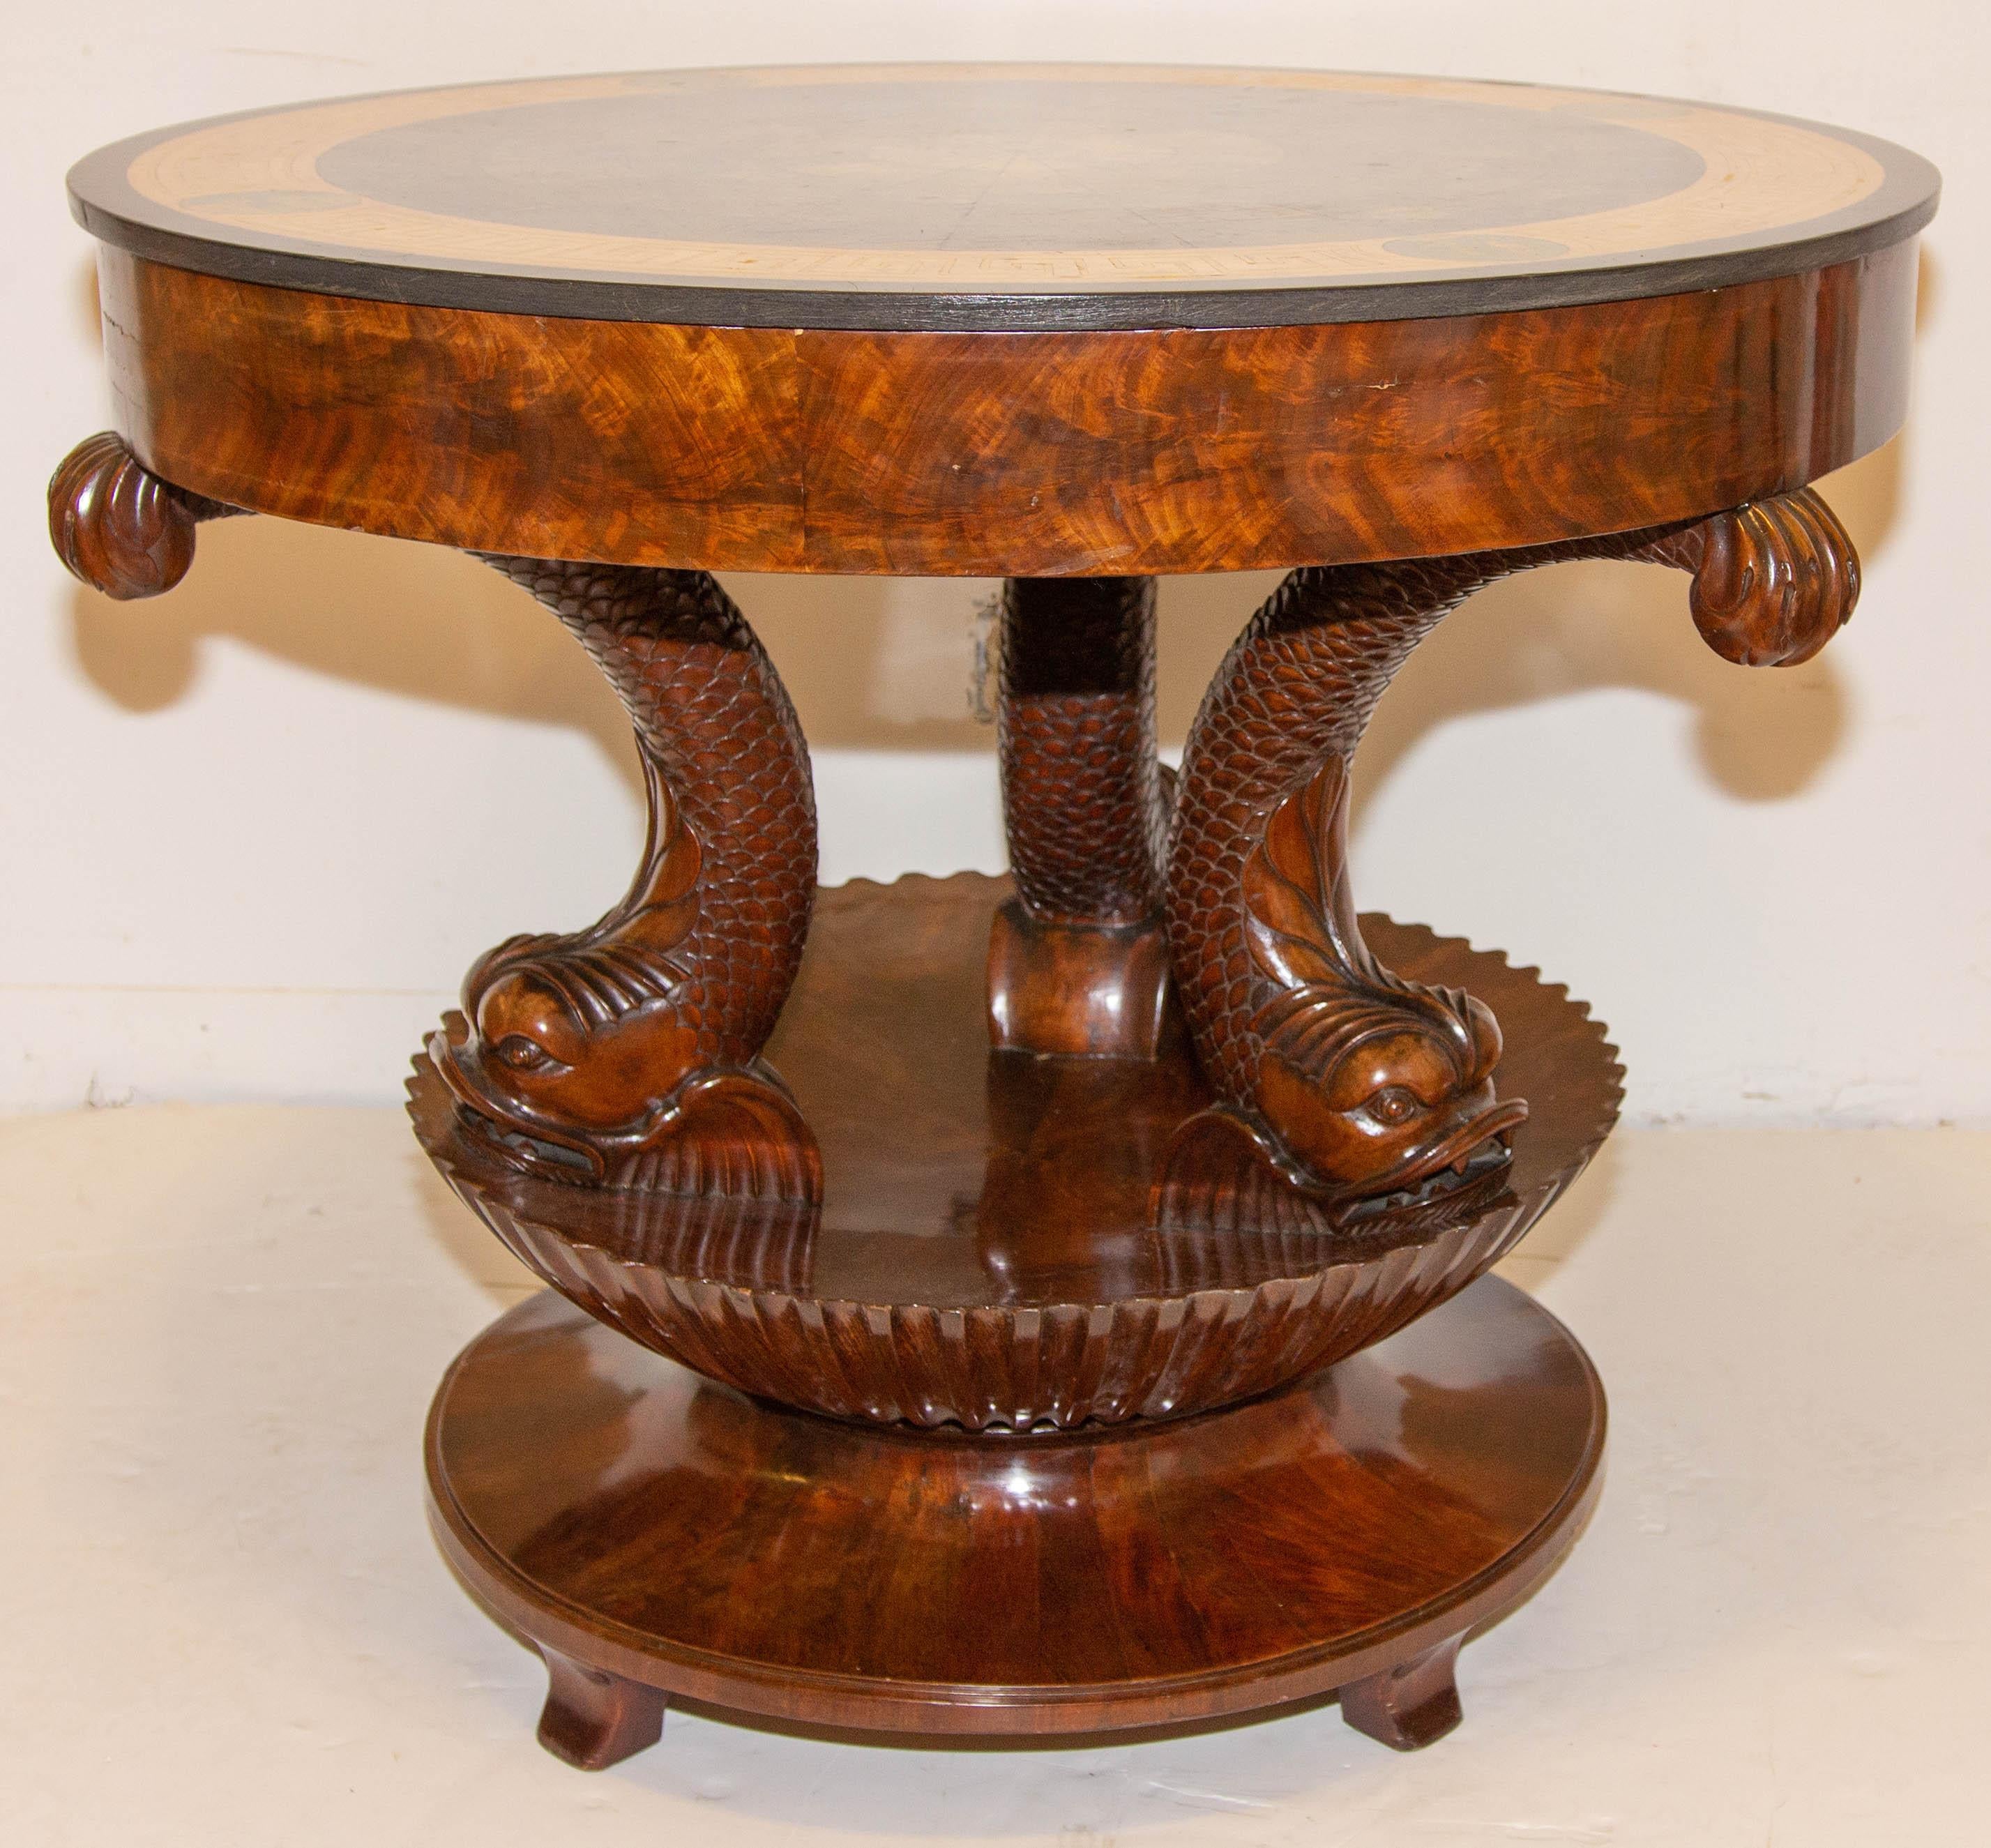 19th Century Antique Italian Neoclassical Sgagliola Table with Carved Dolphin Base circa 1810 For Sale